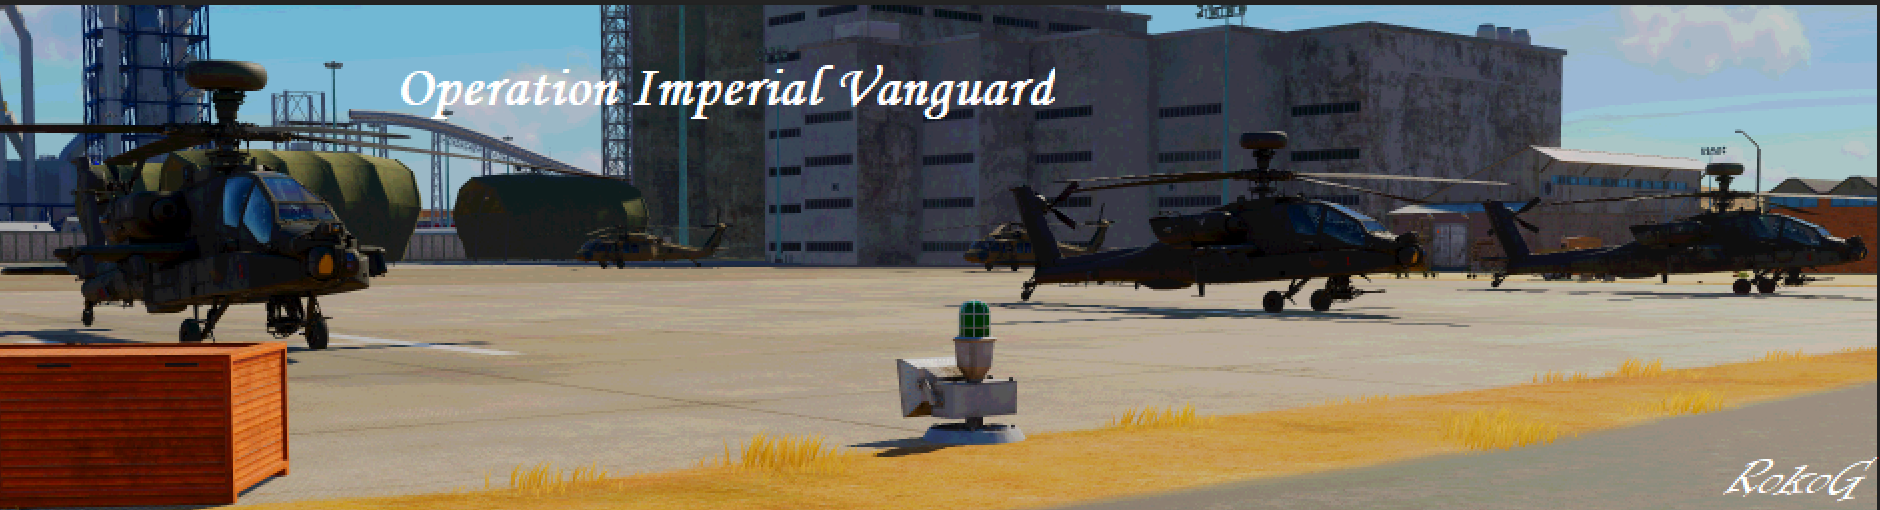 Operation Imperial Vanguard, AH-64D mission by: RokoG